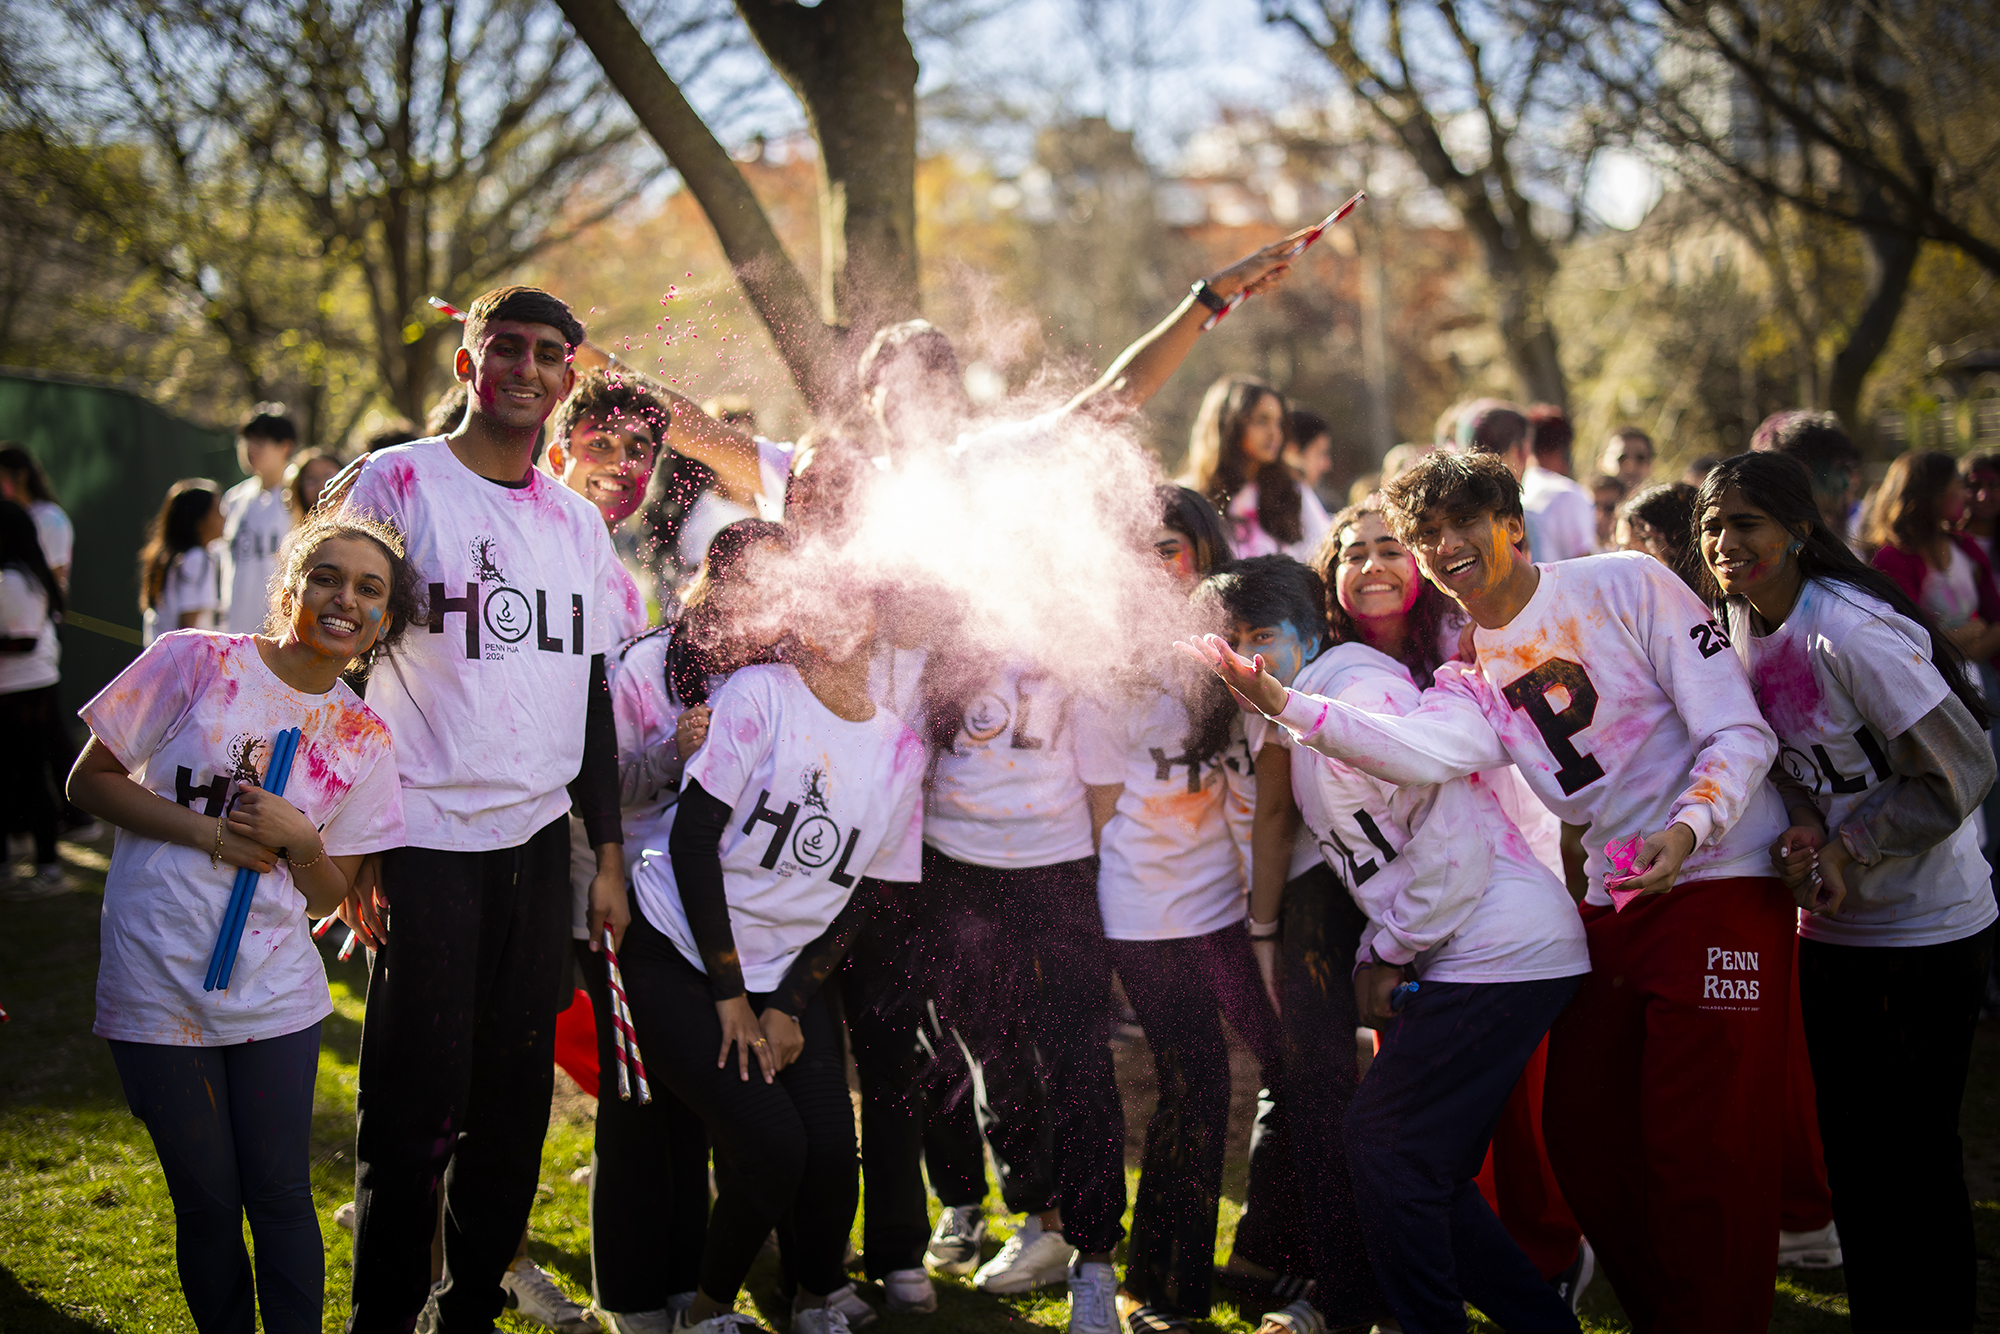 Penn students pose for a photo on College Green during Penn’s Holi celebration.